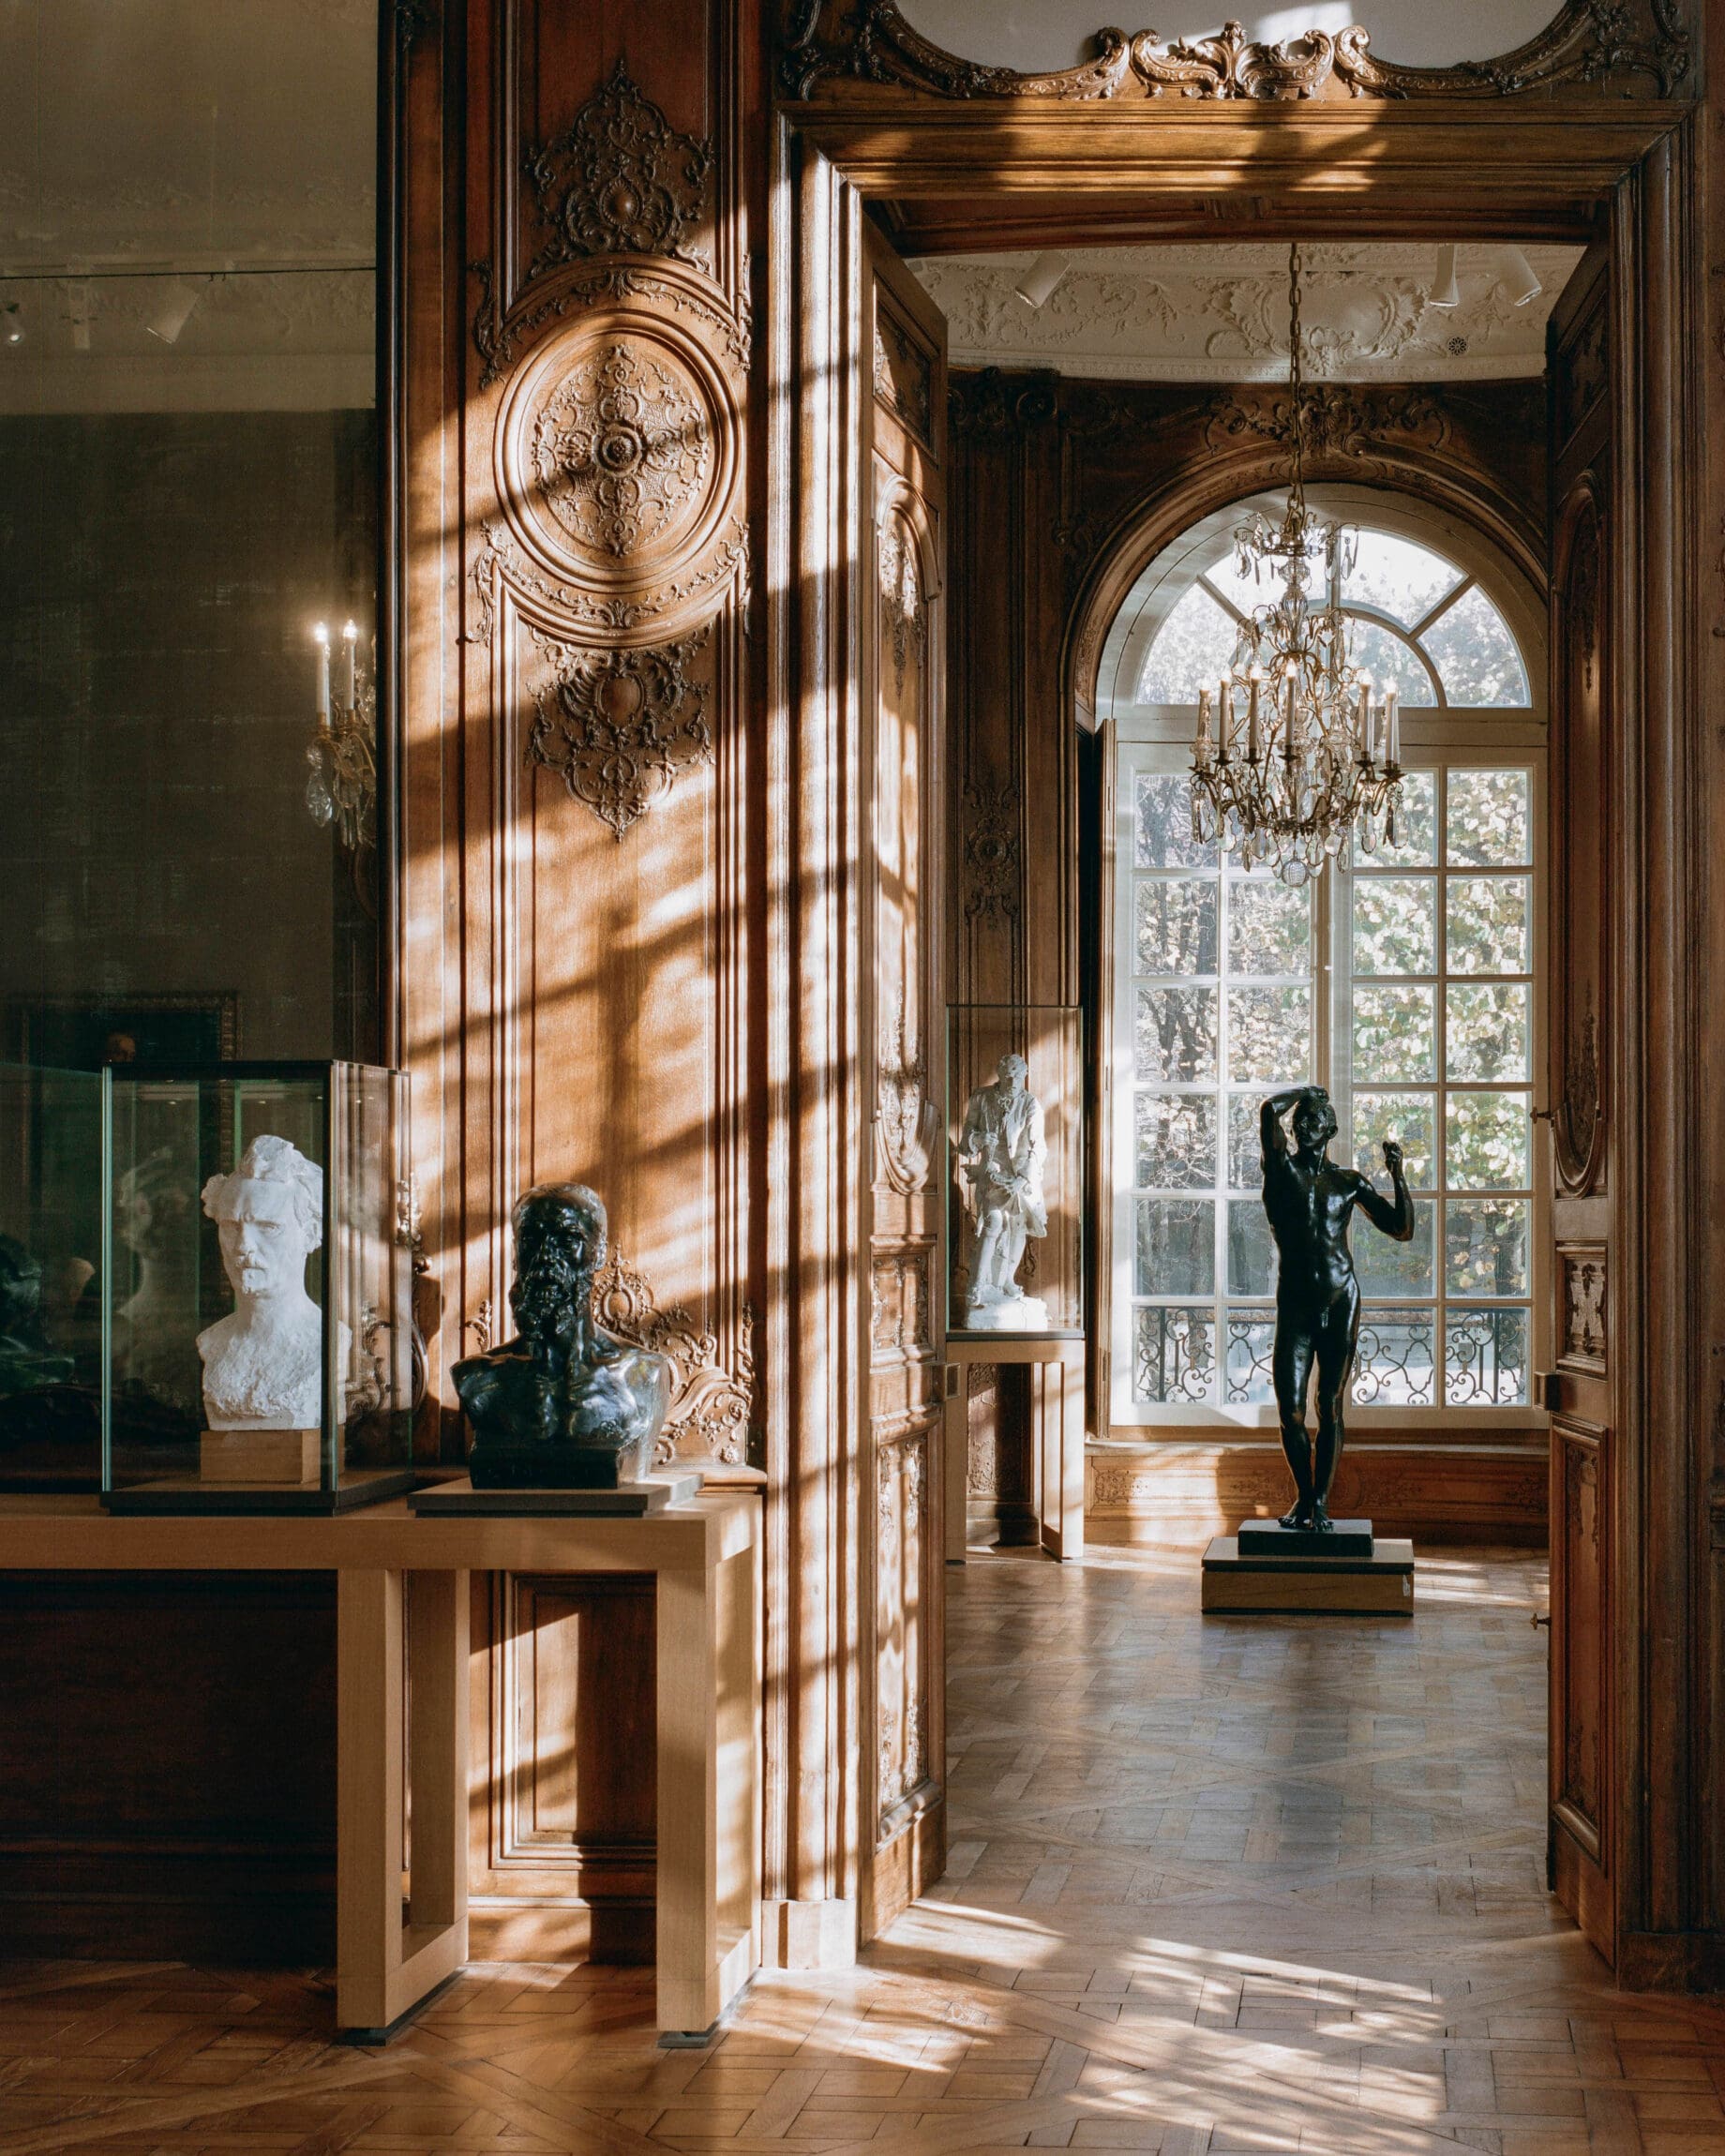 The best art galleries and museums in Paris | Inside Musée Rodin.